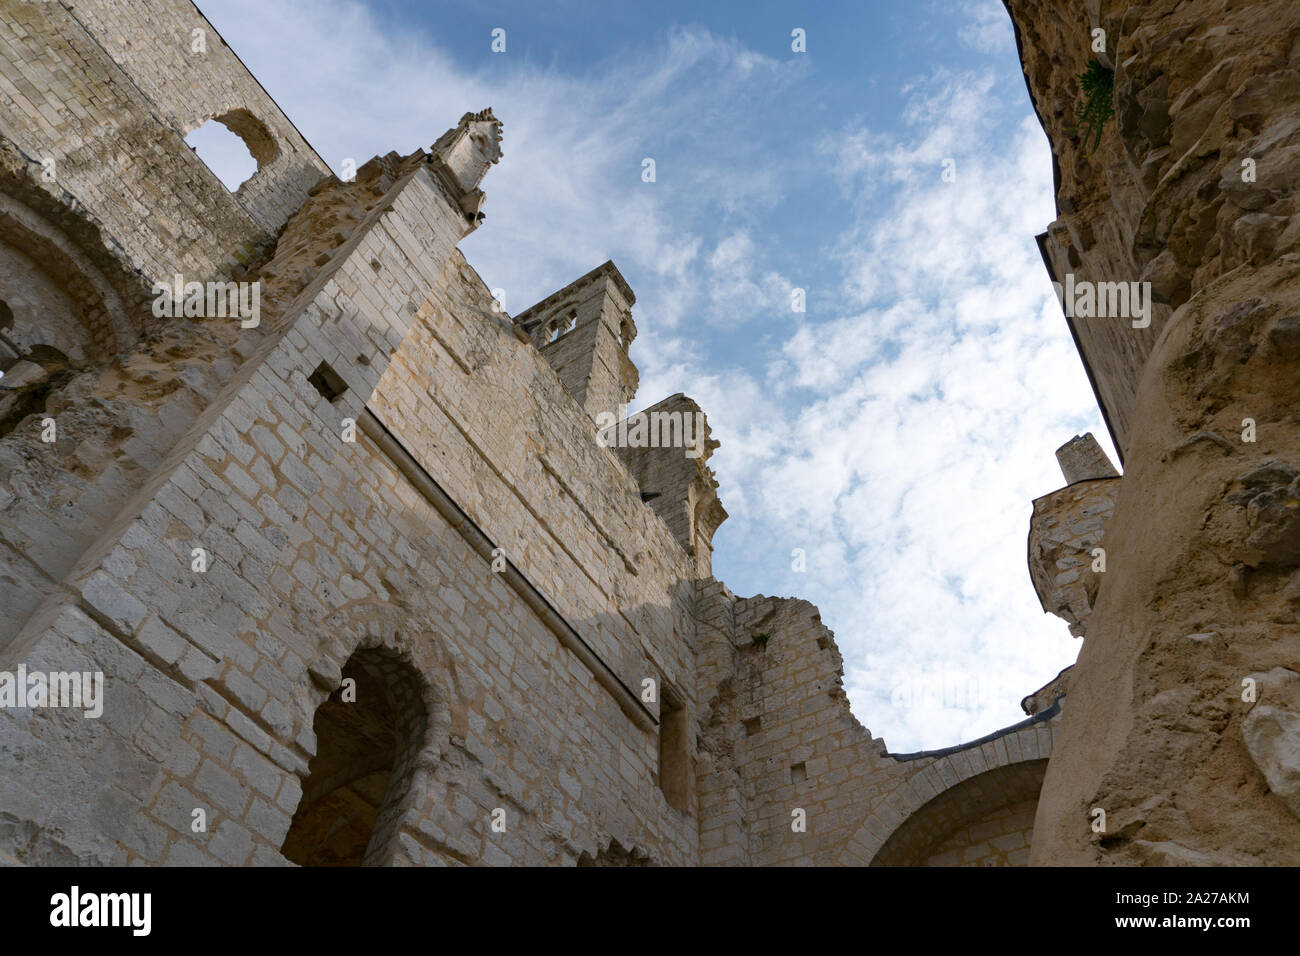 Jumieges, Normandy / France - 13 August 2019: detail view of the ruins of the old abbey and Benedictine monastery at Jumieges in Normandy in France Stock Photo